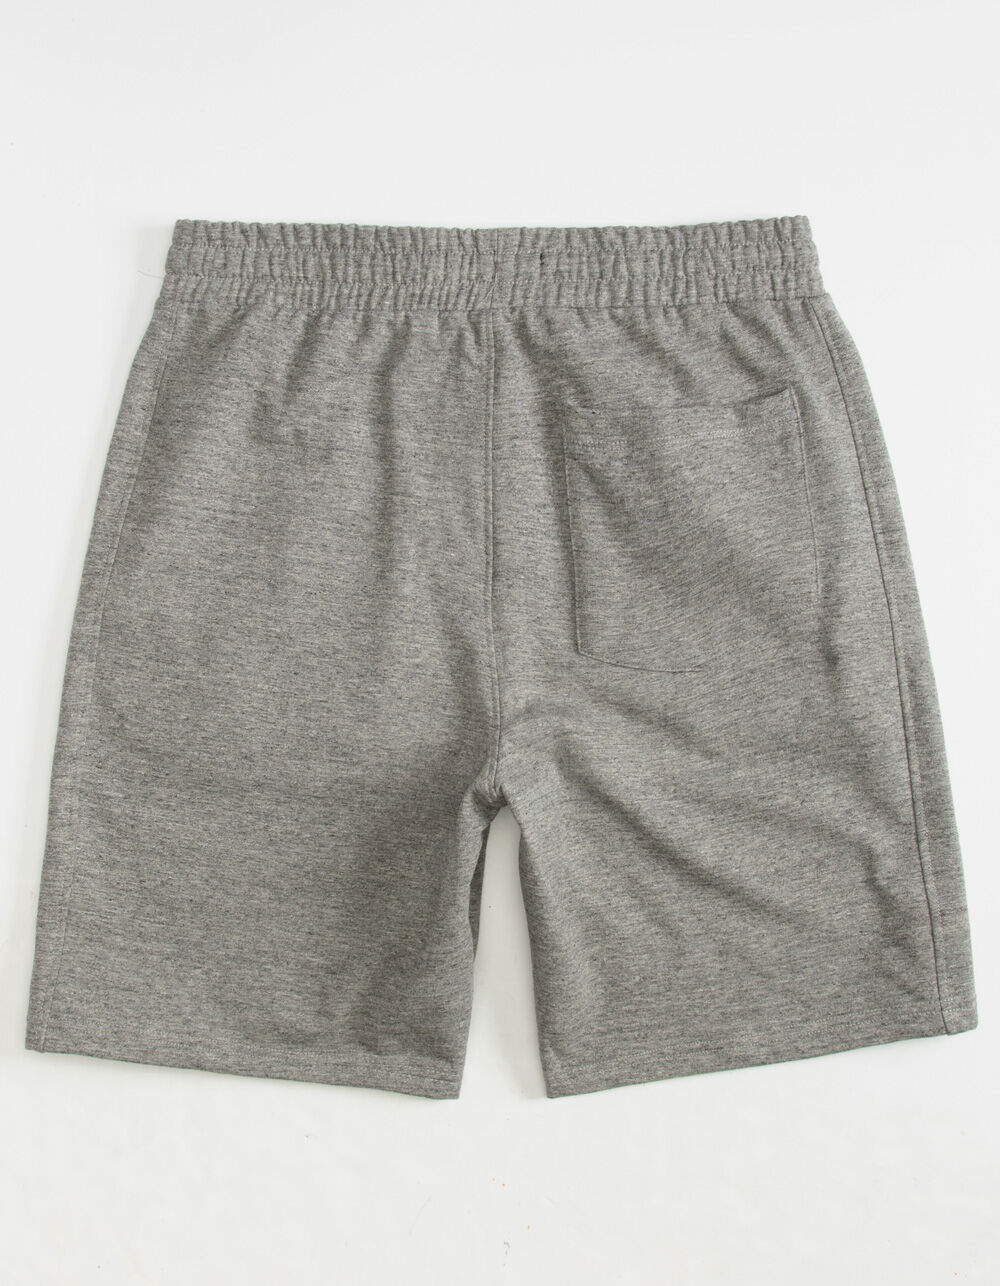 Sweat - Gray RSQ Tillys | Heather Mens Shorts HEATHER GRAY